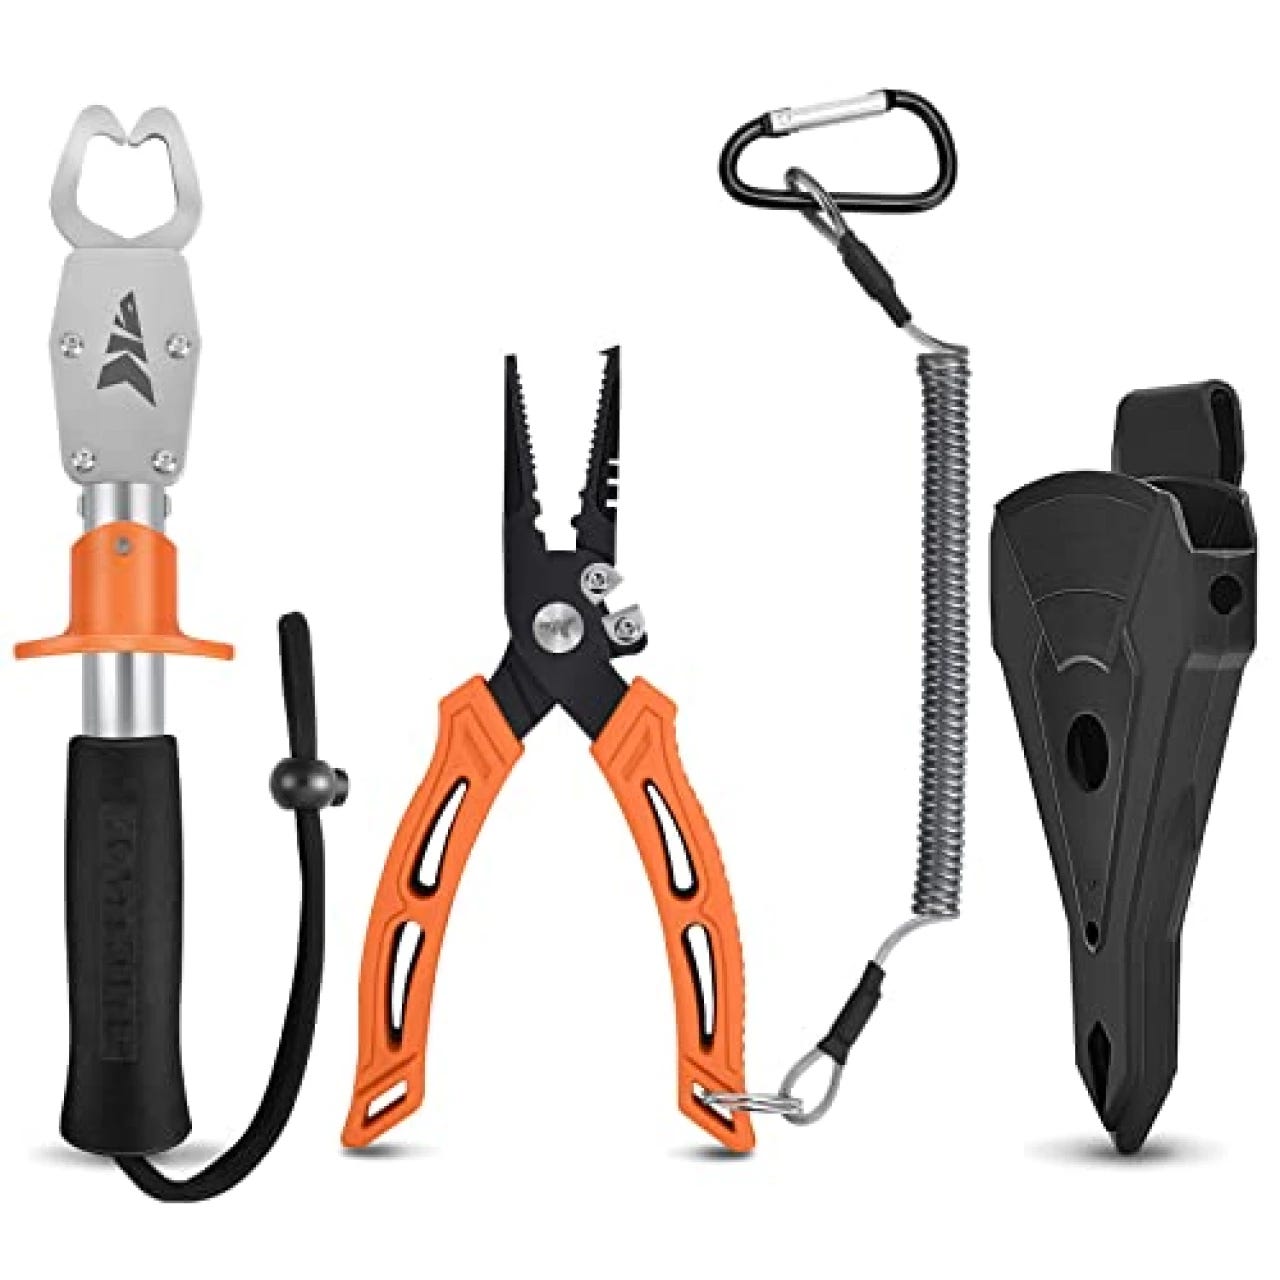 2023's Top 5 Fishing Tools: Pliers, Grippers, Scales for Anglers, by  Magdalena